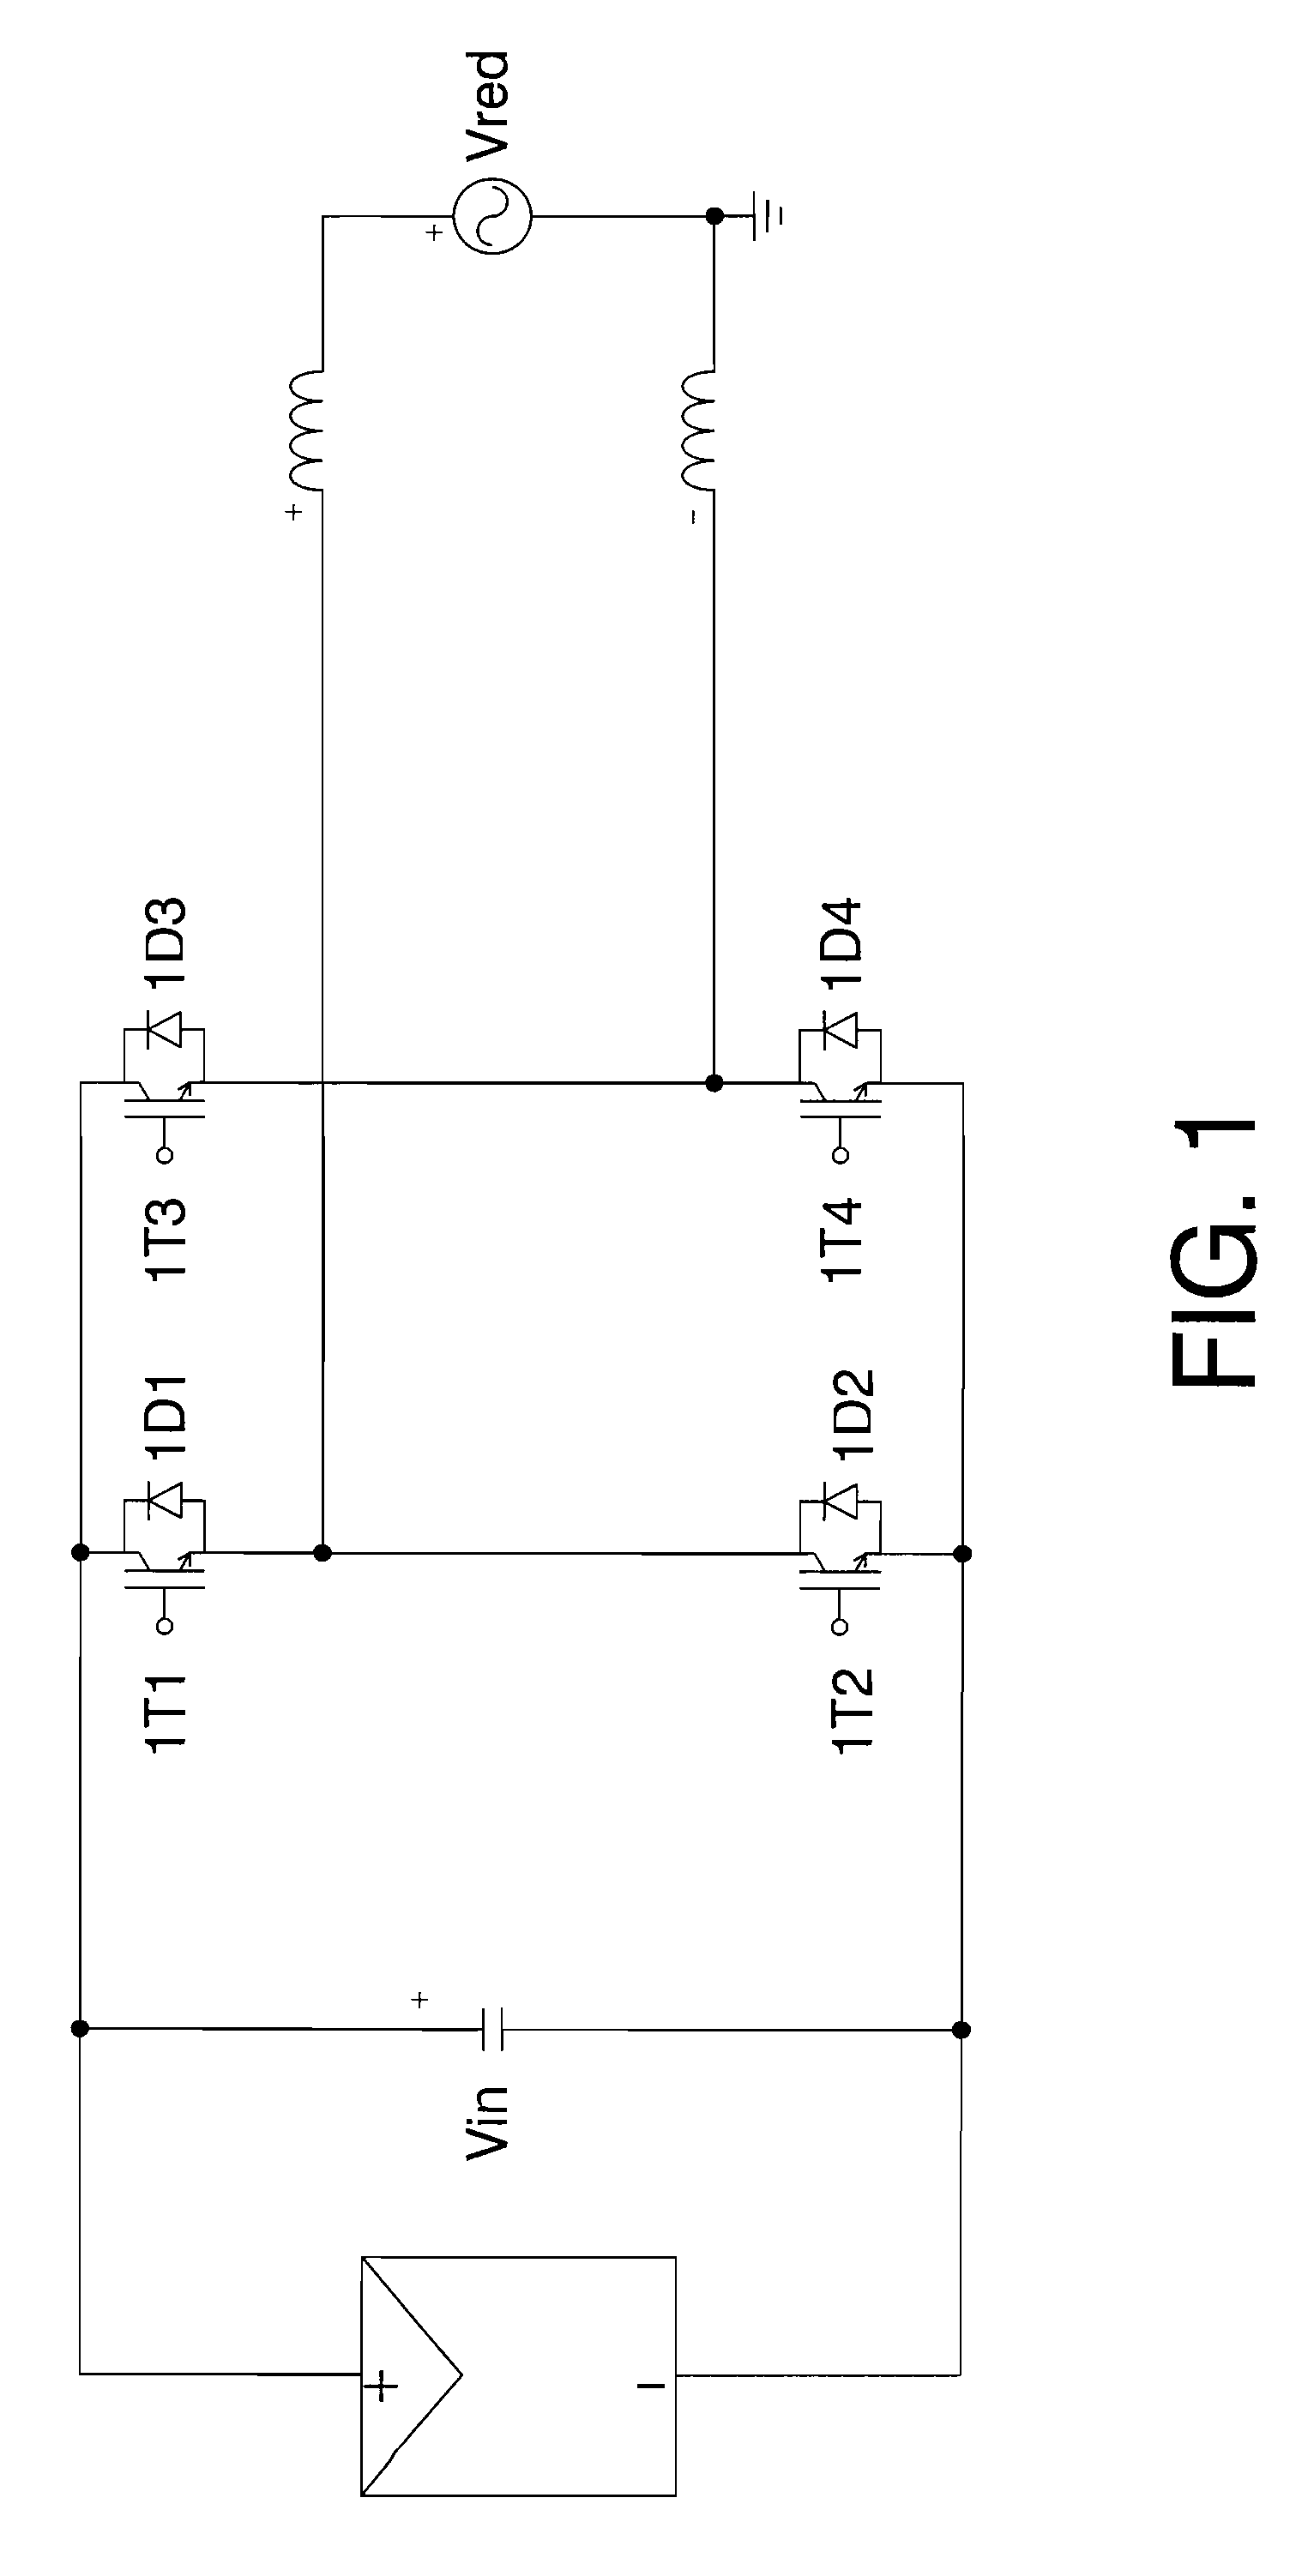 Electric circuit for converting direct current into alternating current